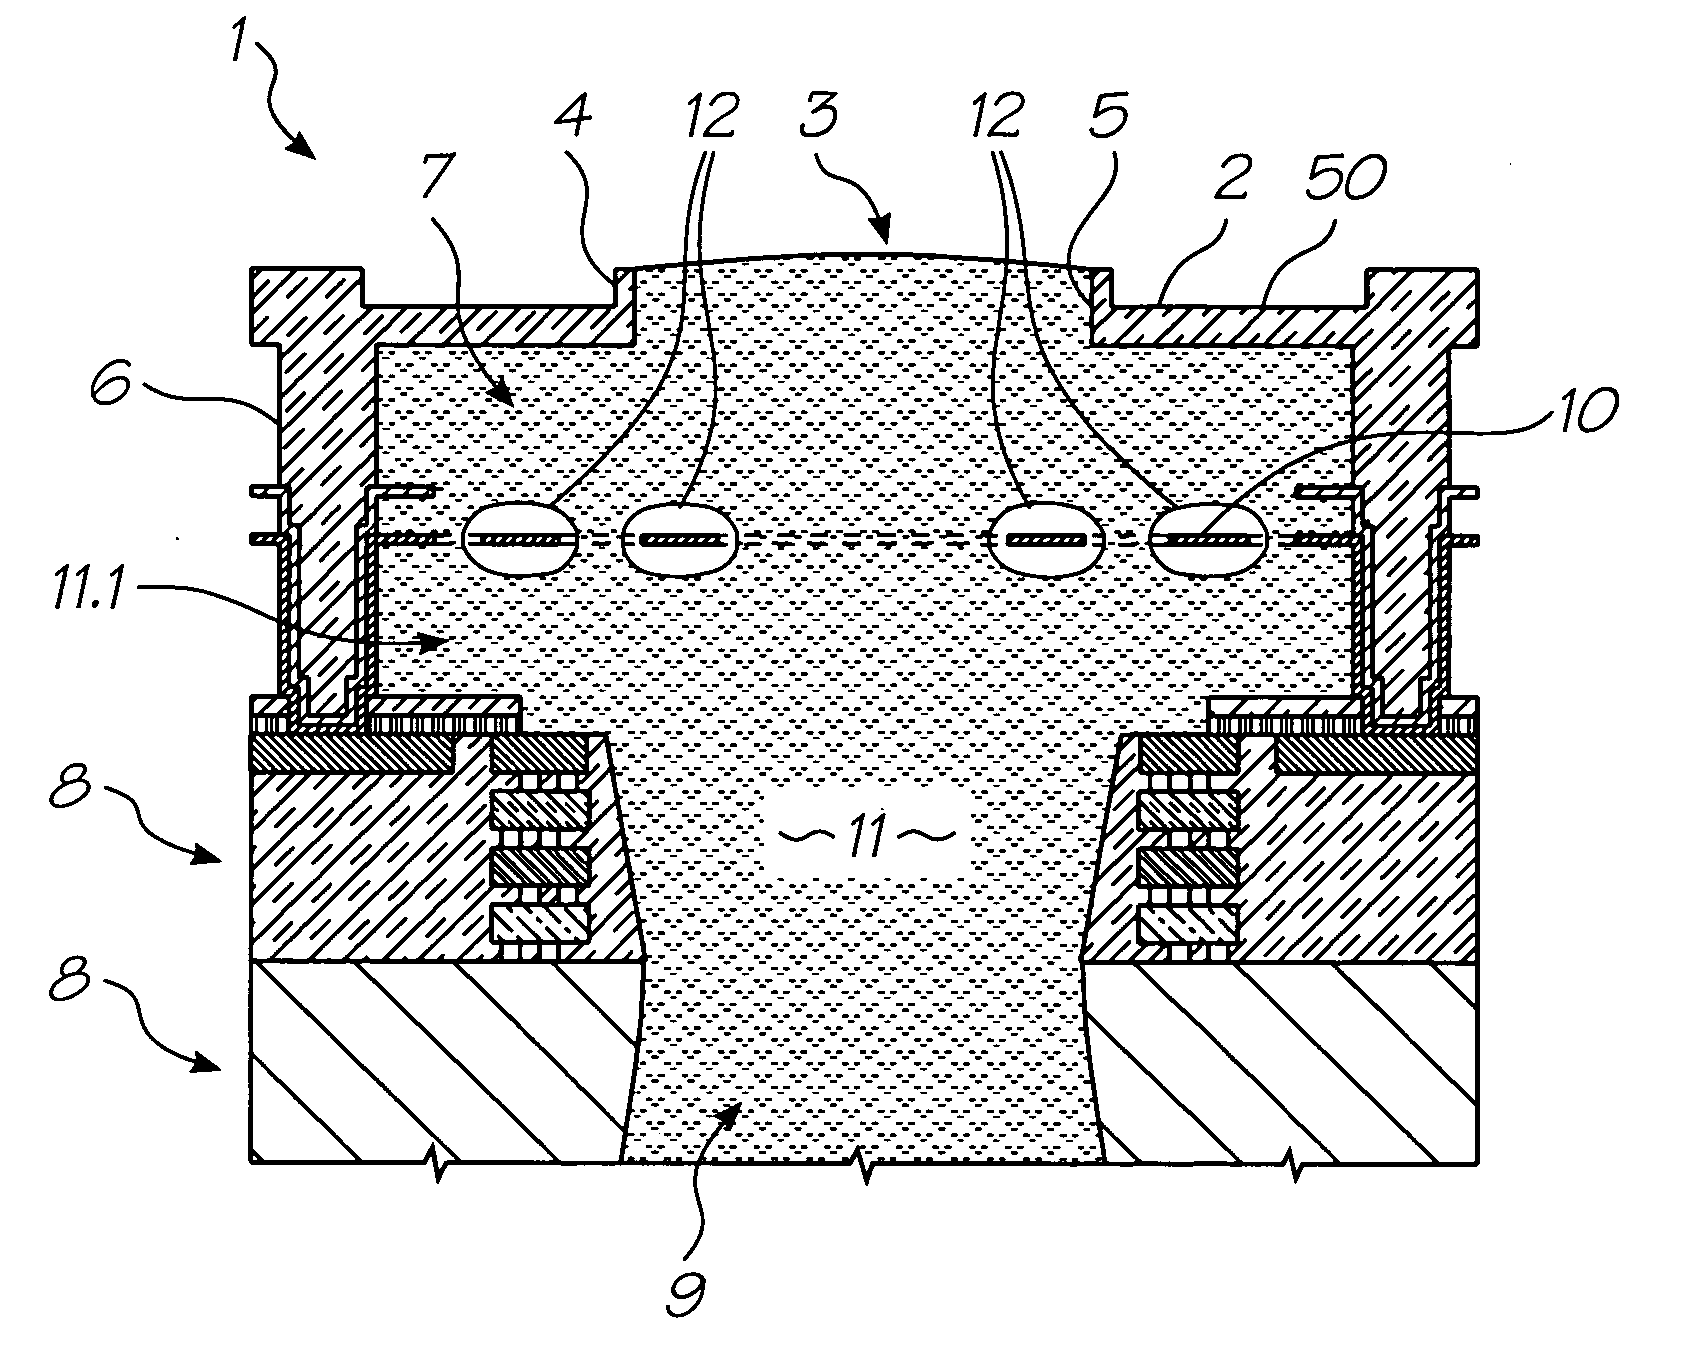 Inkjet printhead heater elements with thin or non-existent coatings